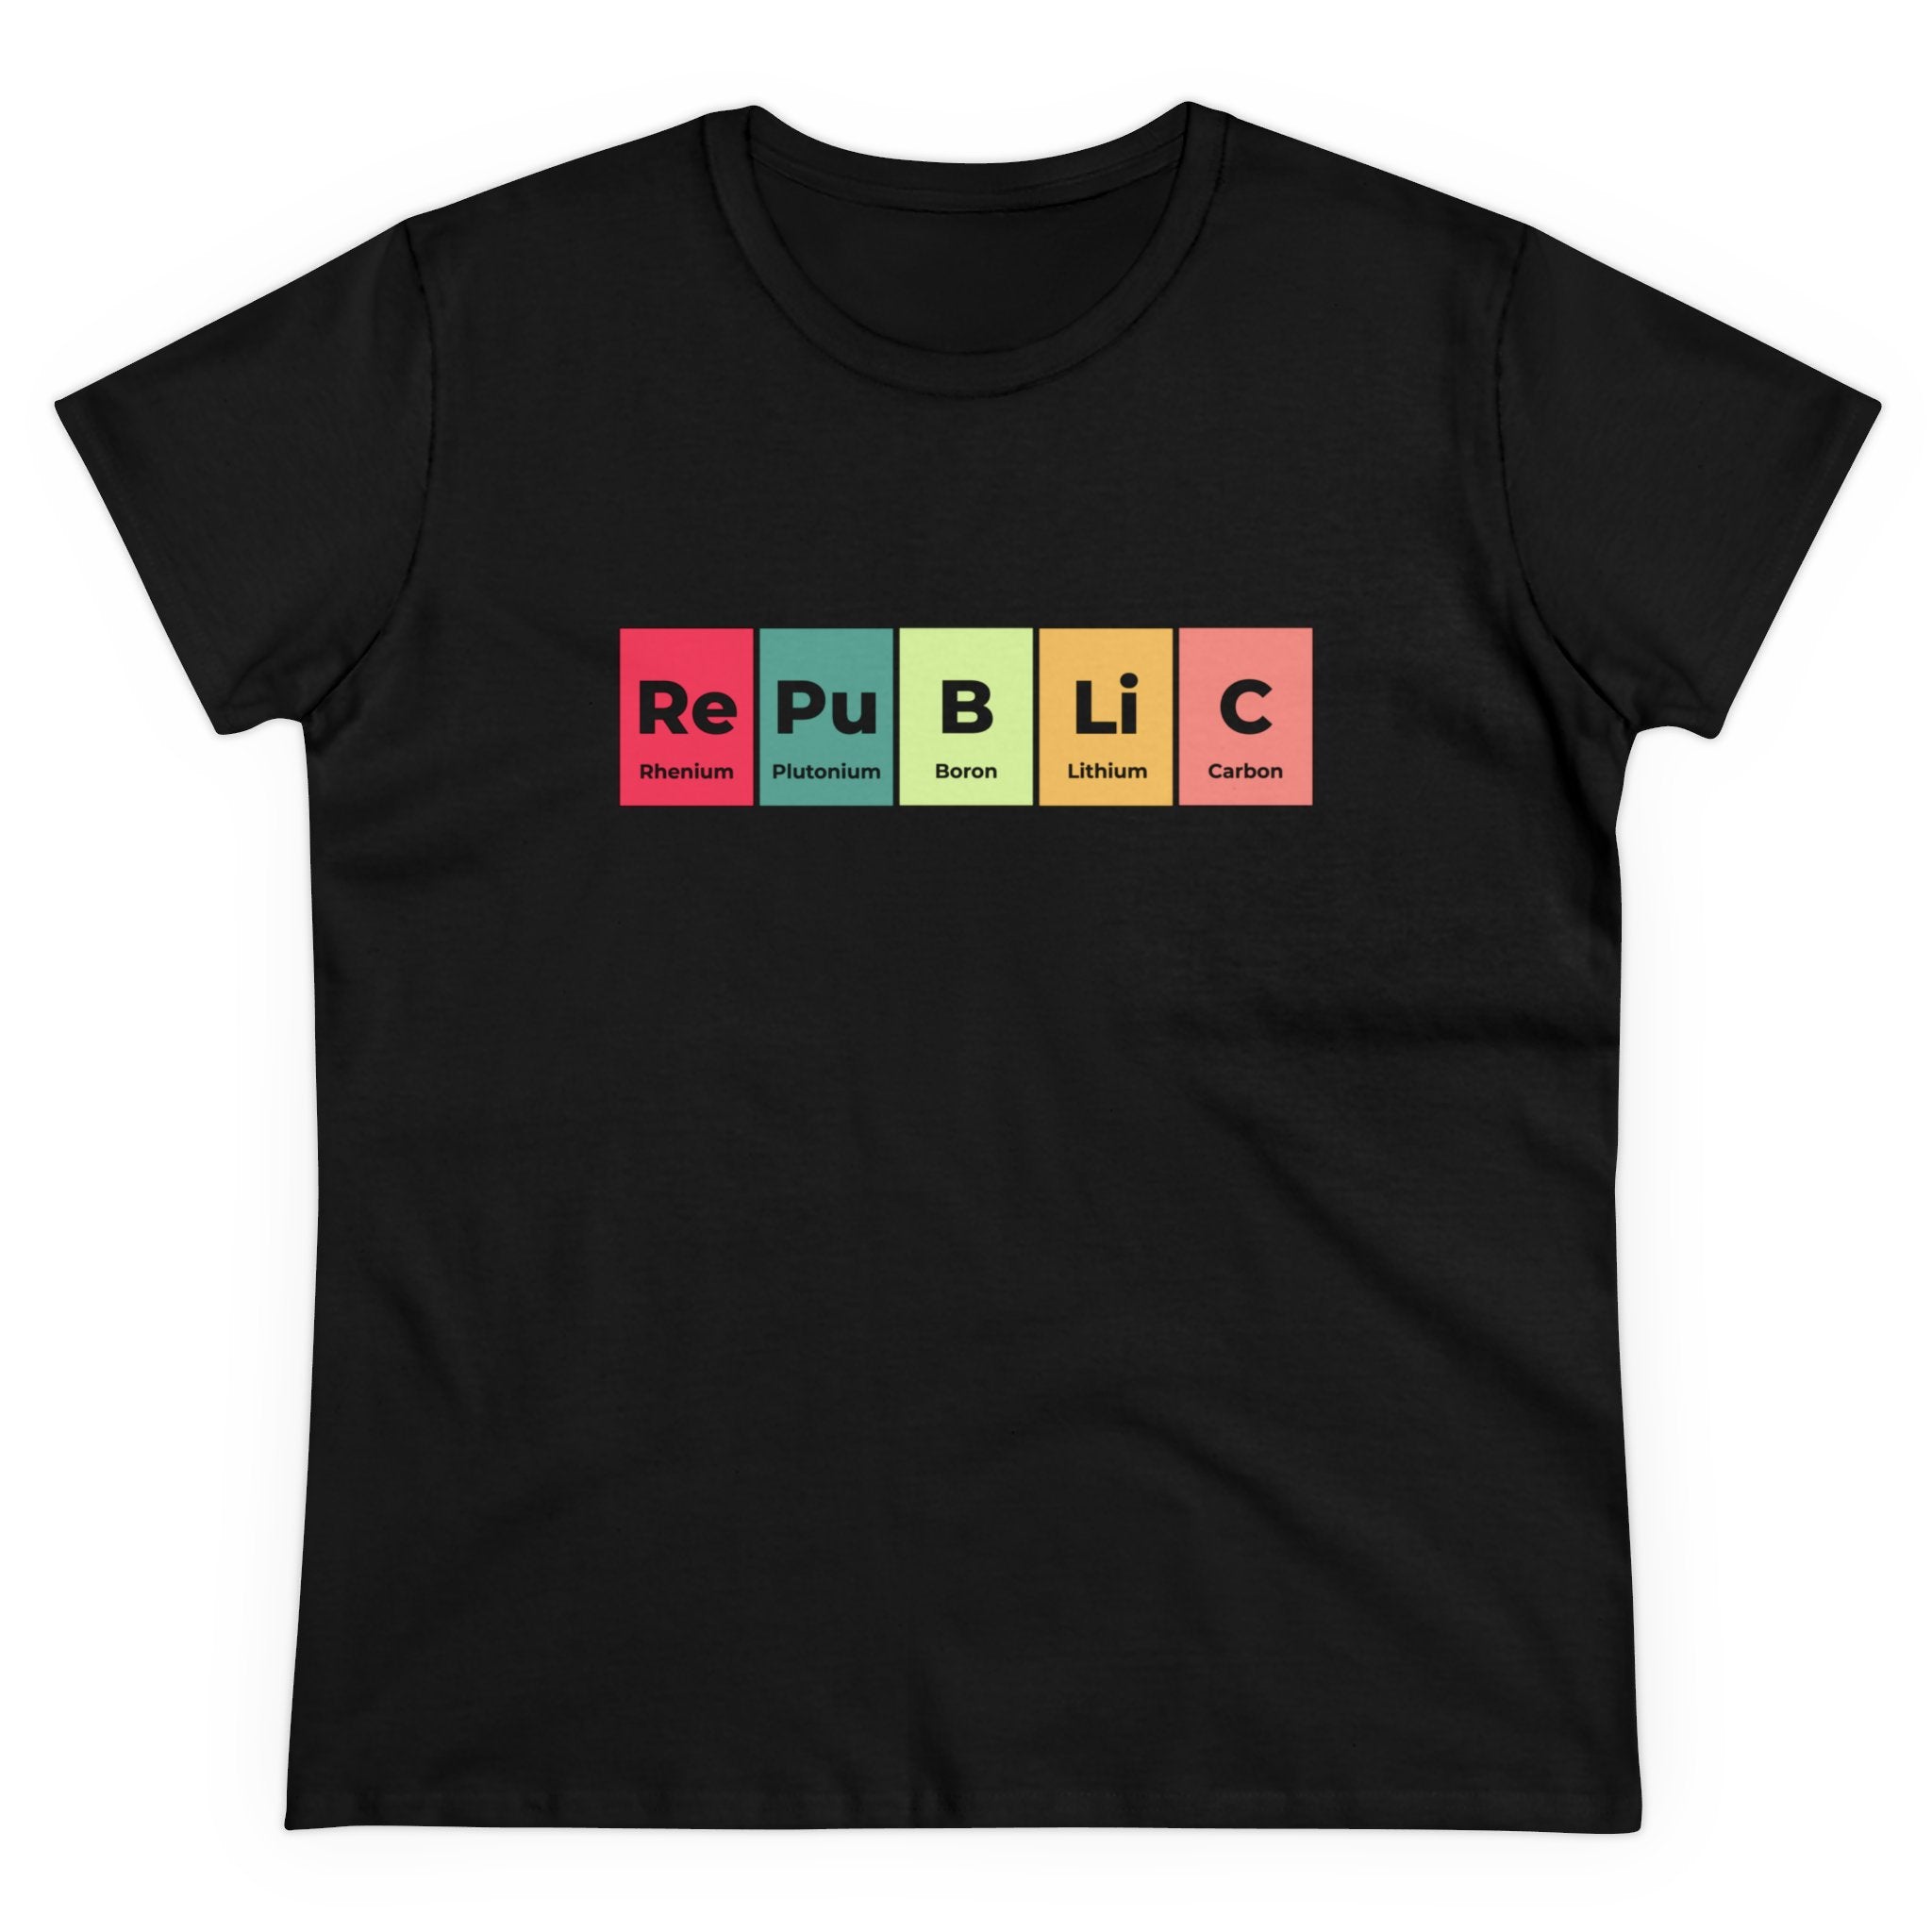 Fashionable black Republic - Women's Tee displaying the word "Republic" using periodic table element symbols in various colors, made from ethically grown US cotton.